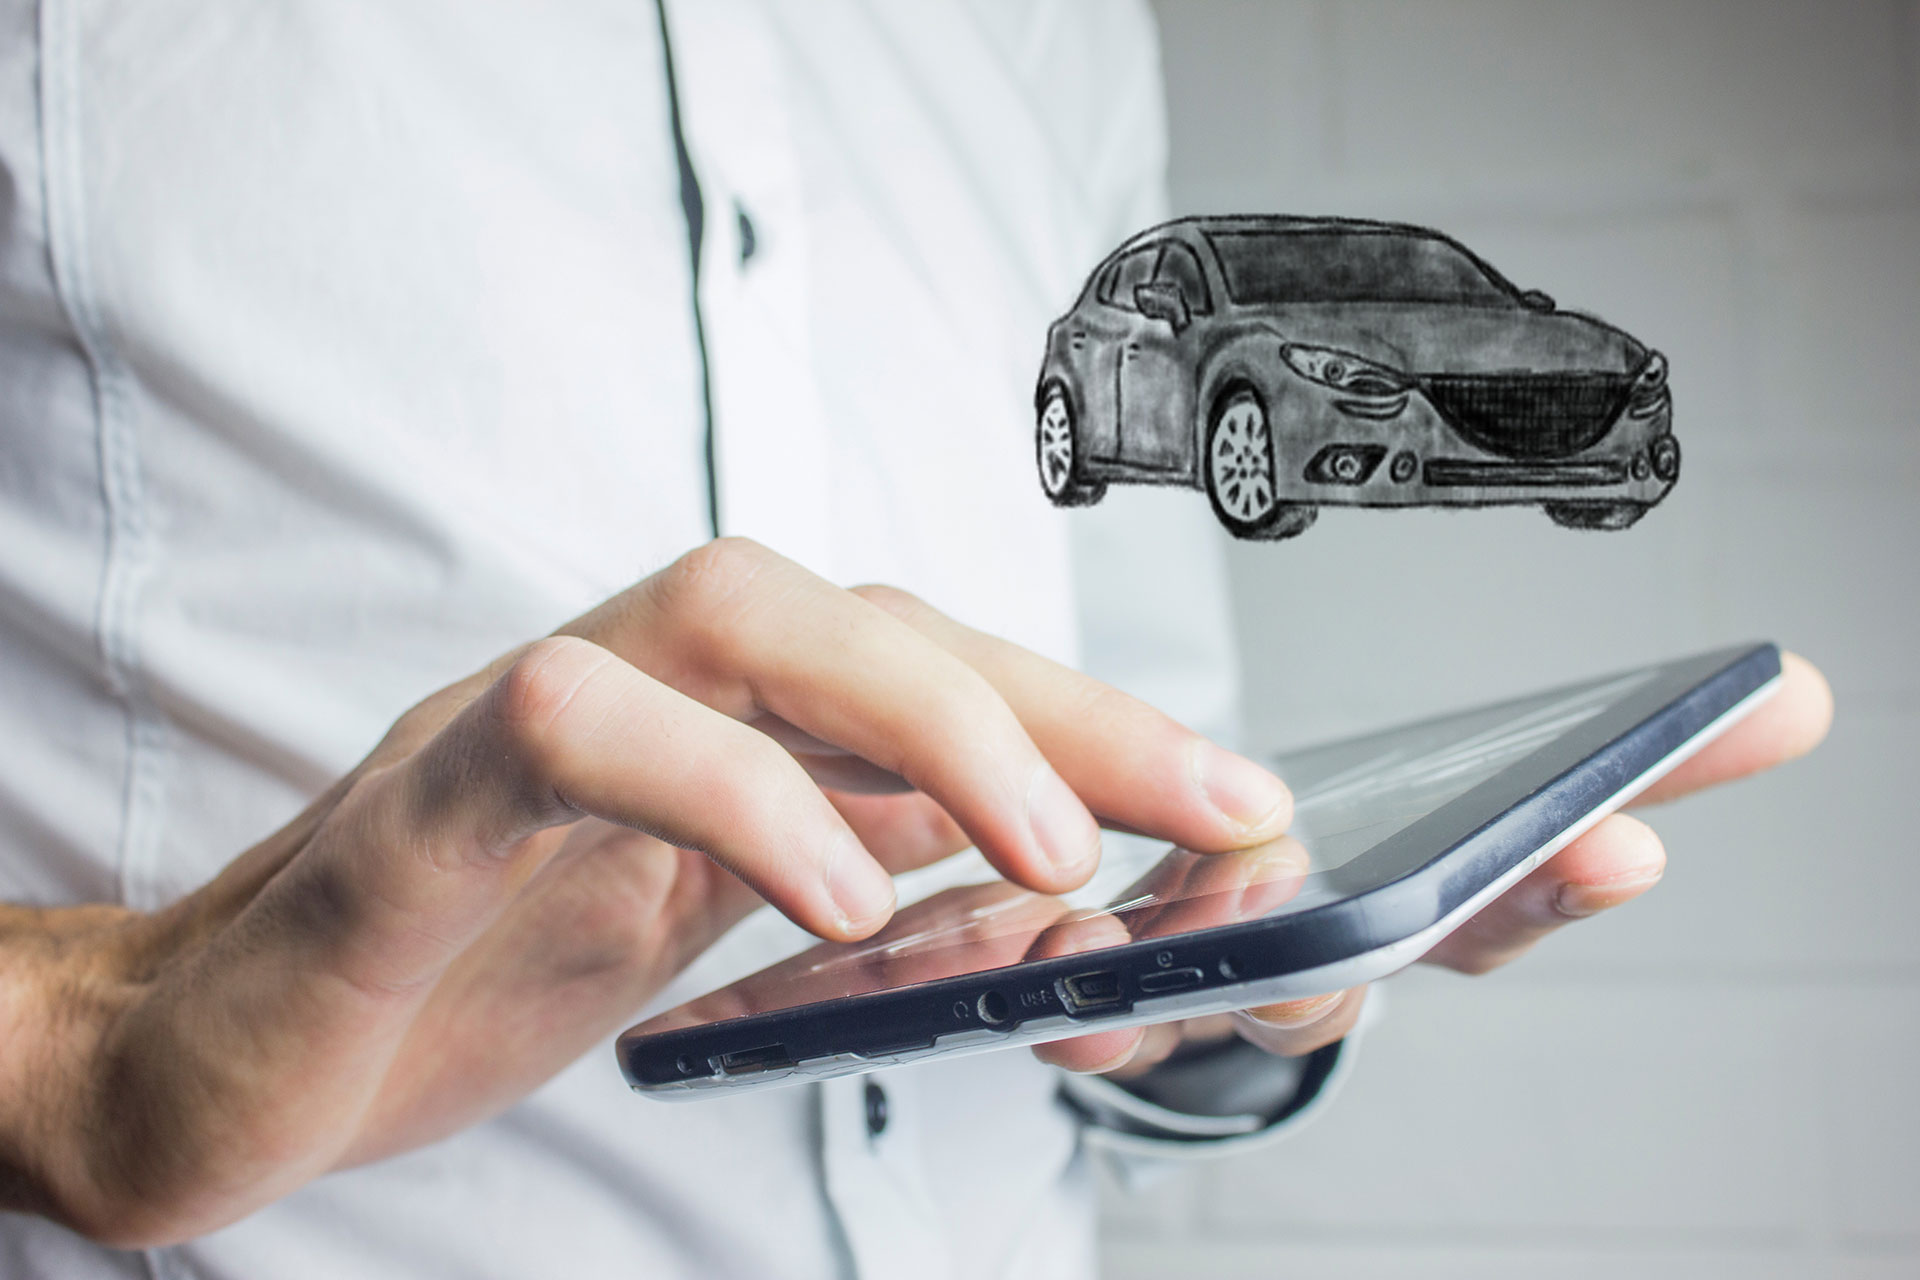 COVID-19 is speeding up dealership digitalisation and the transition into online car sales is no exception. This demonstrates the importance of a painless, simple car buying experience for the industry in general.